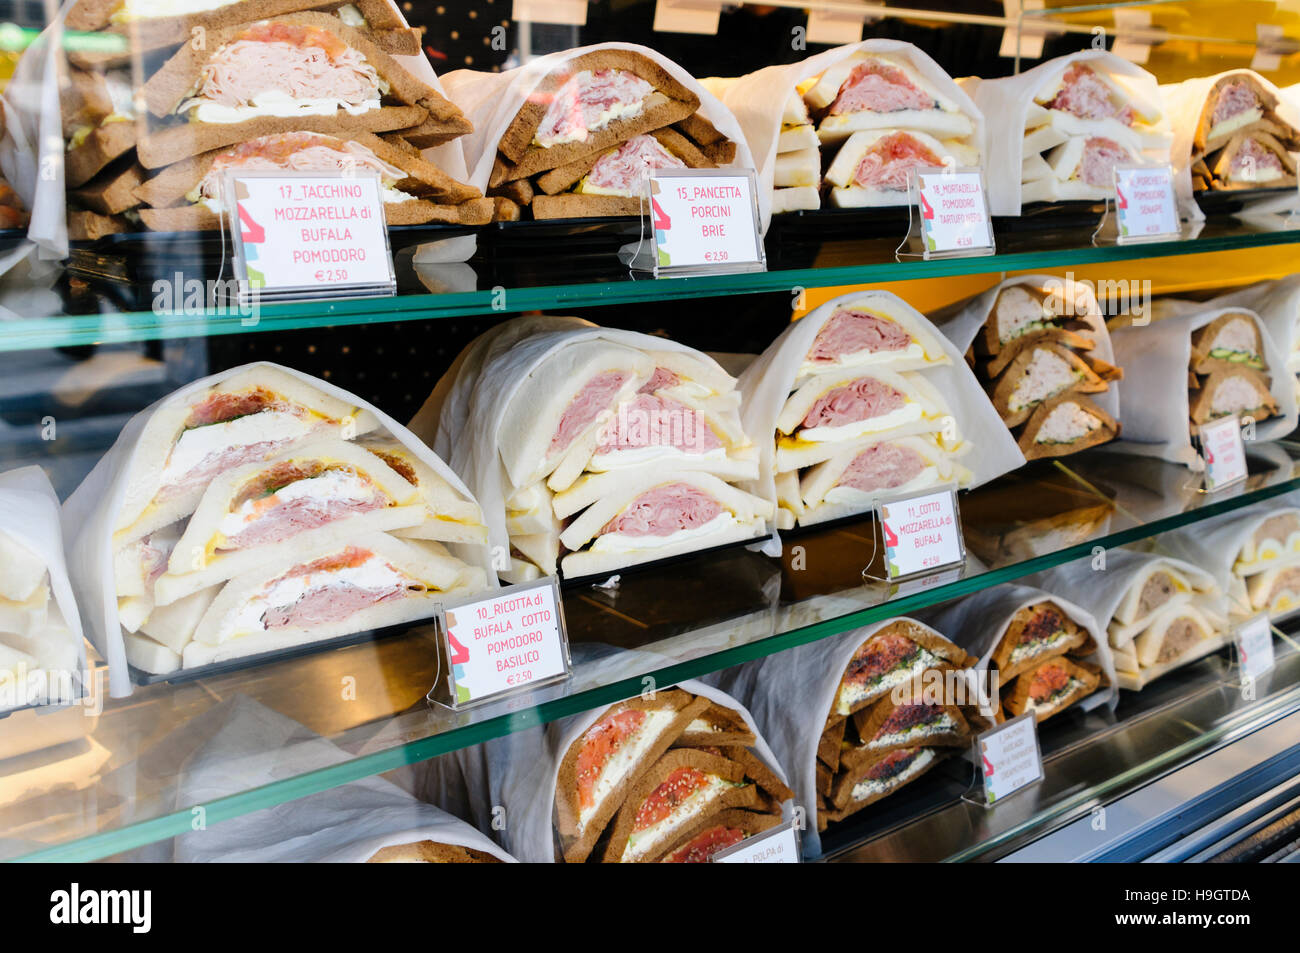 Freshly made sandwiches on sale in a sandwich shop in Milan, Italy. Stock Photo